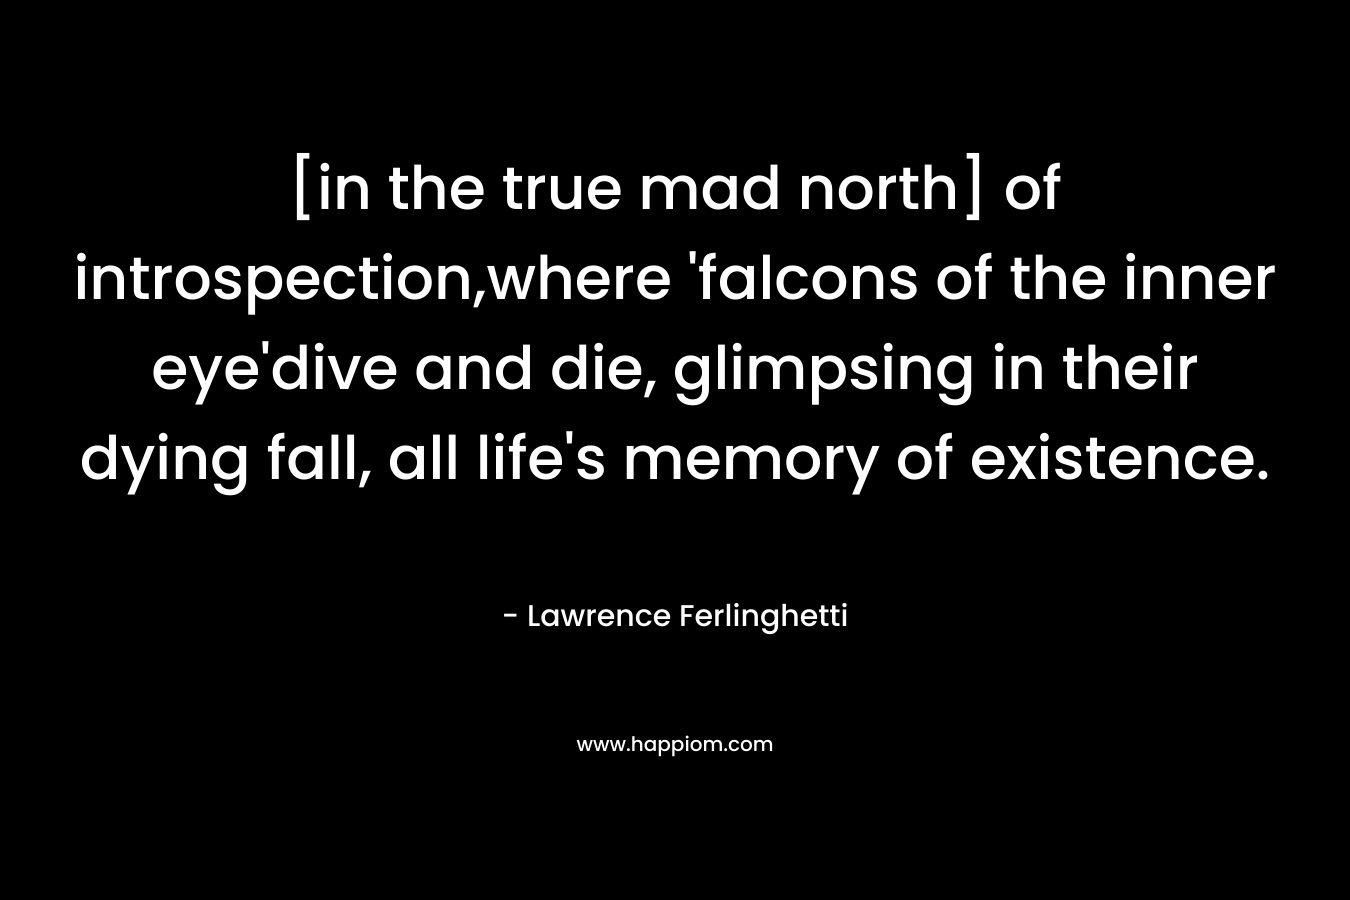 [in the true mad north] of introspection,where 'falcons of the inner eye'dive and die, glimpsing in their dying fall, all life's memory of existence.